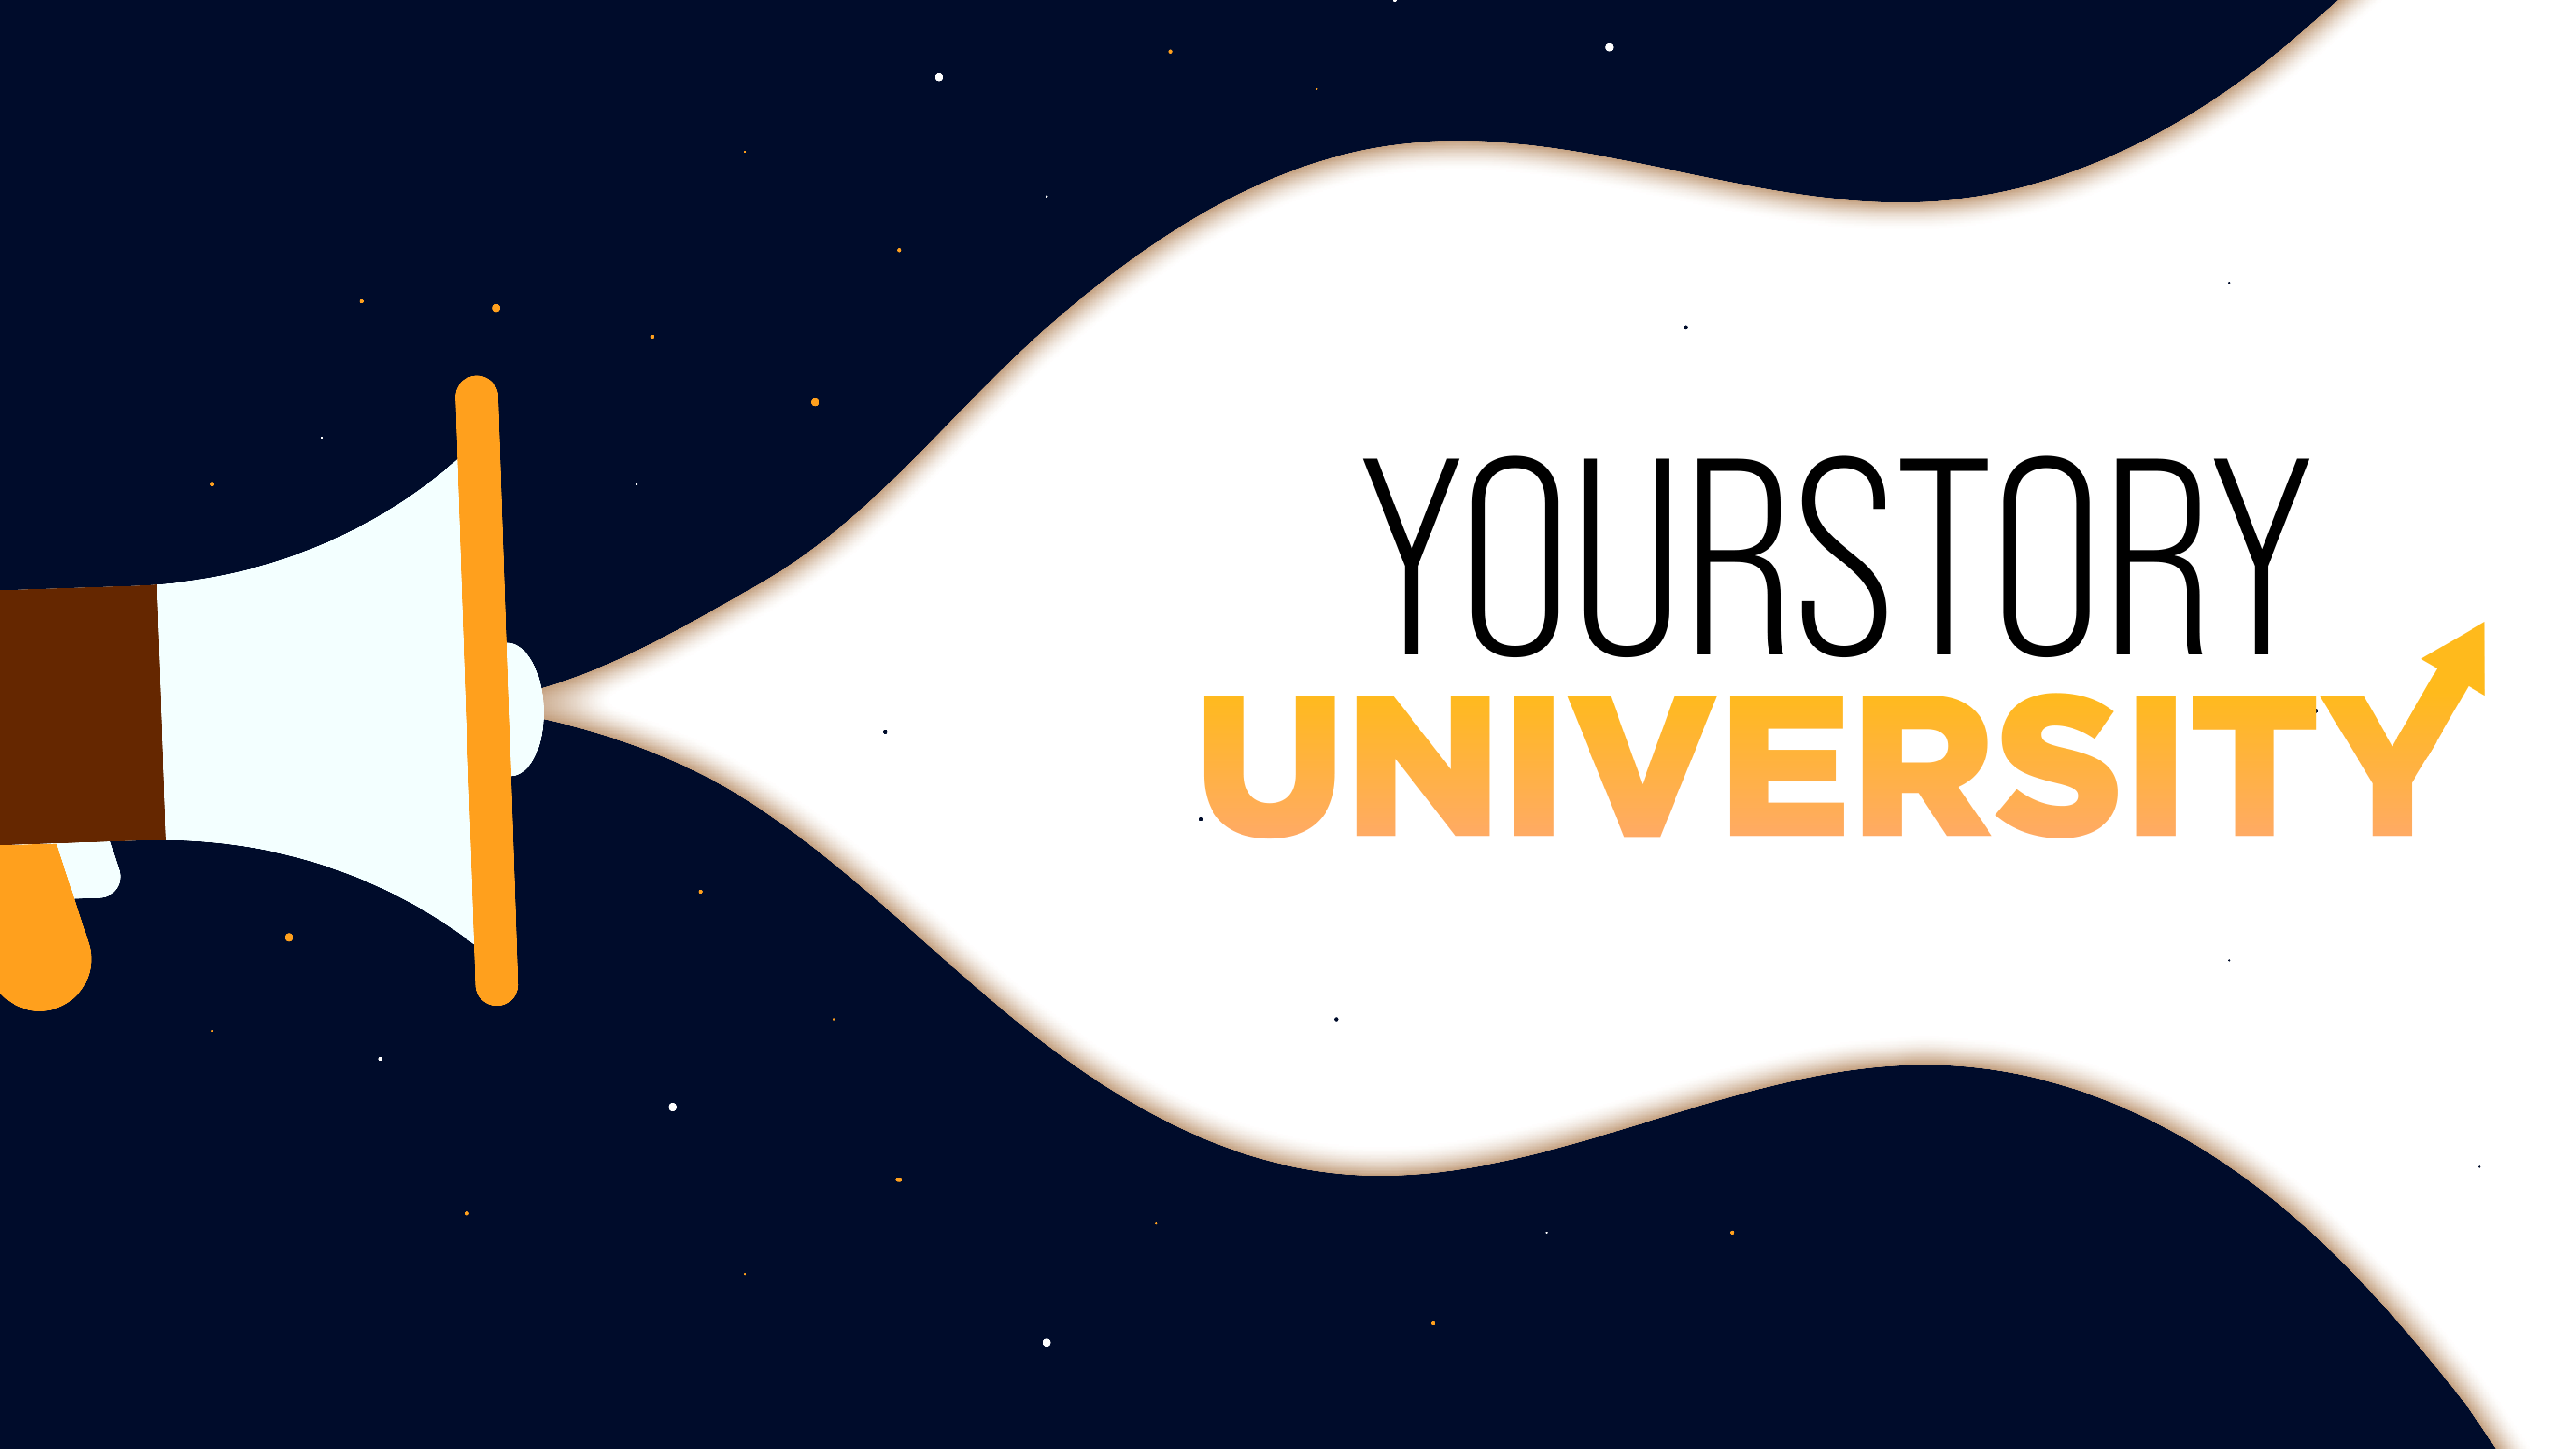 A new beginning; YourStory University